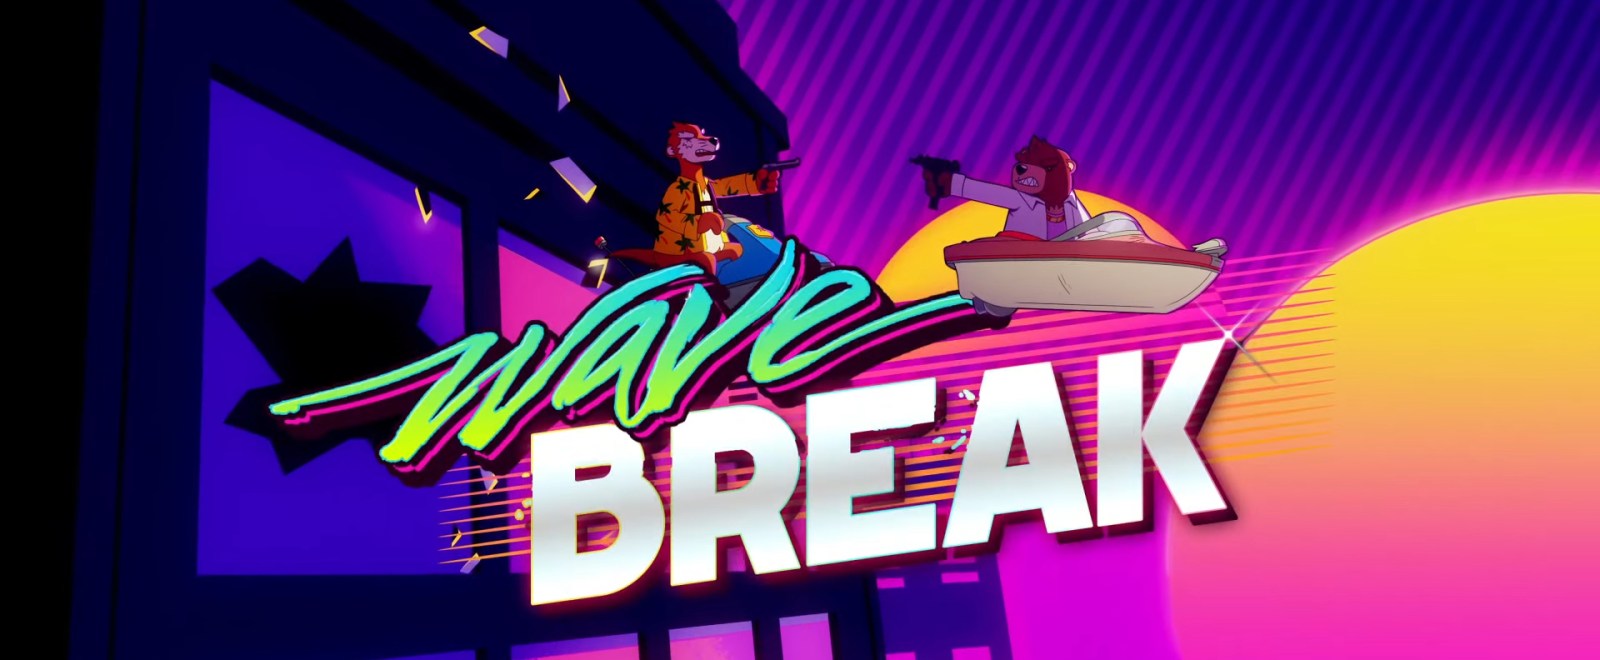 Wave Break Is The World S First Skateboating Game And It Looks Rad As Hell - roblox song id chris issak